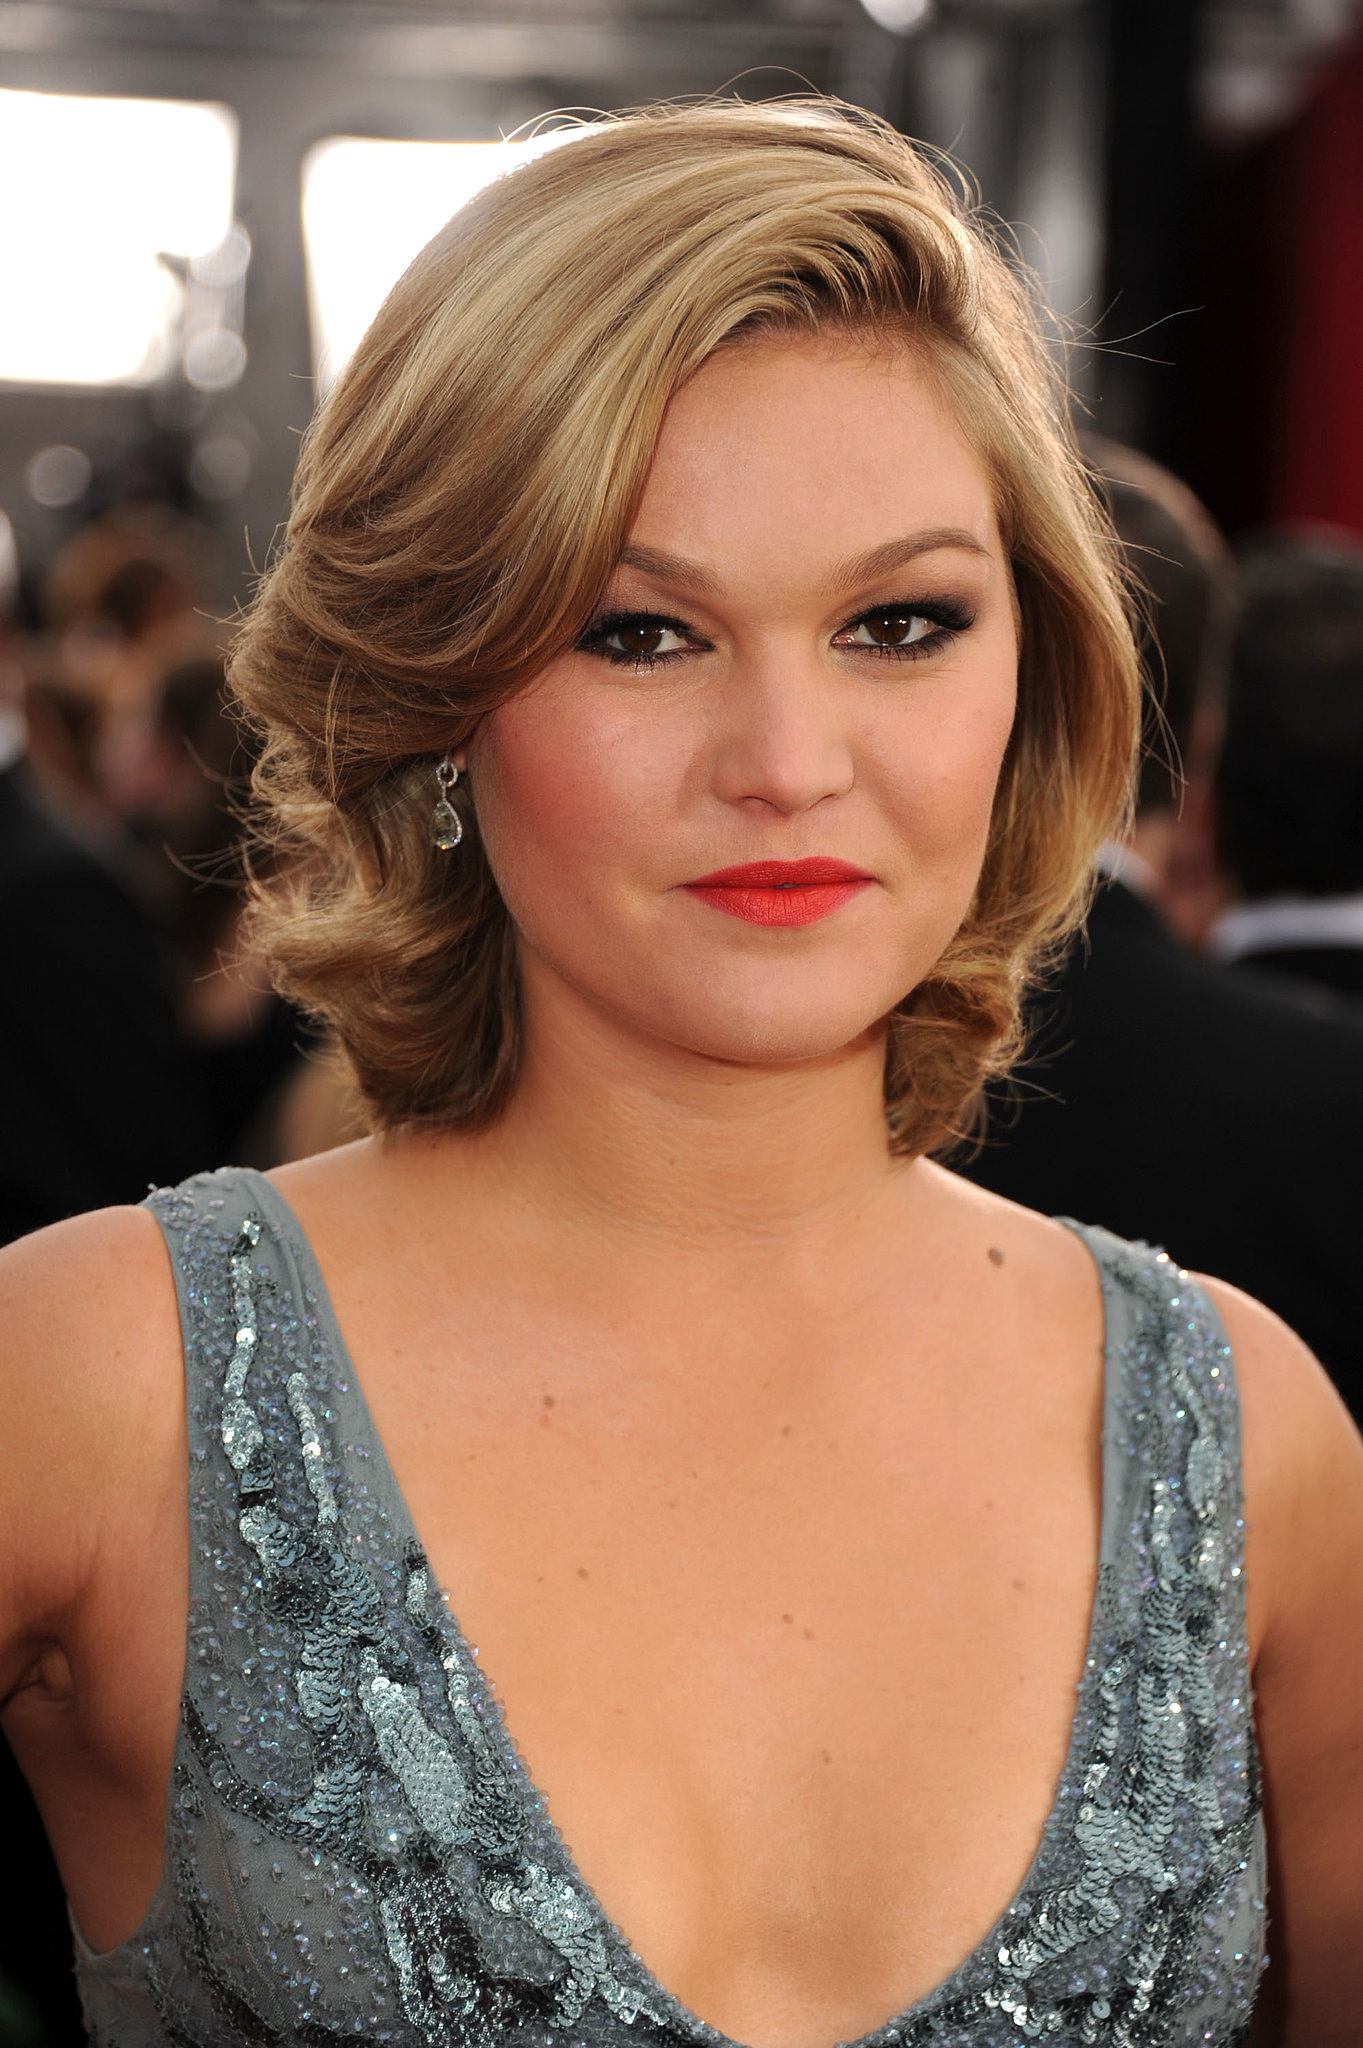 Julia Stiles 50 Reasons Red Lipstick Will Never Go Out Of Style.